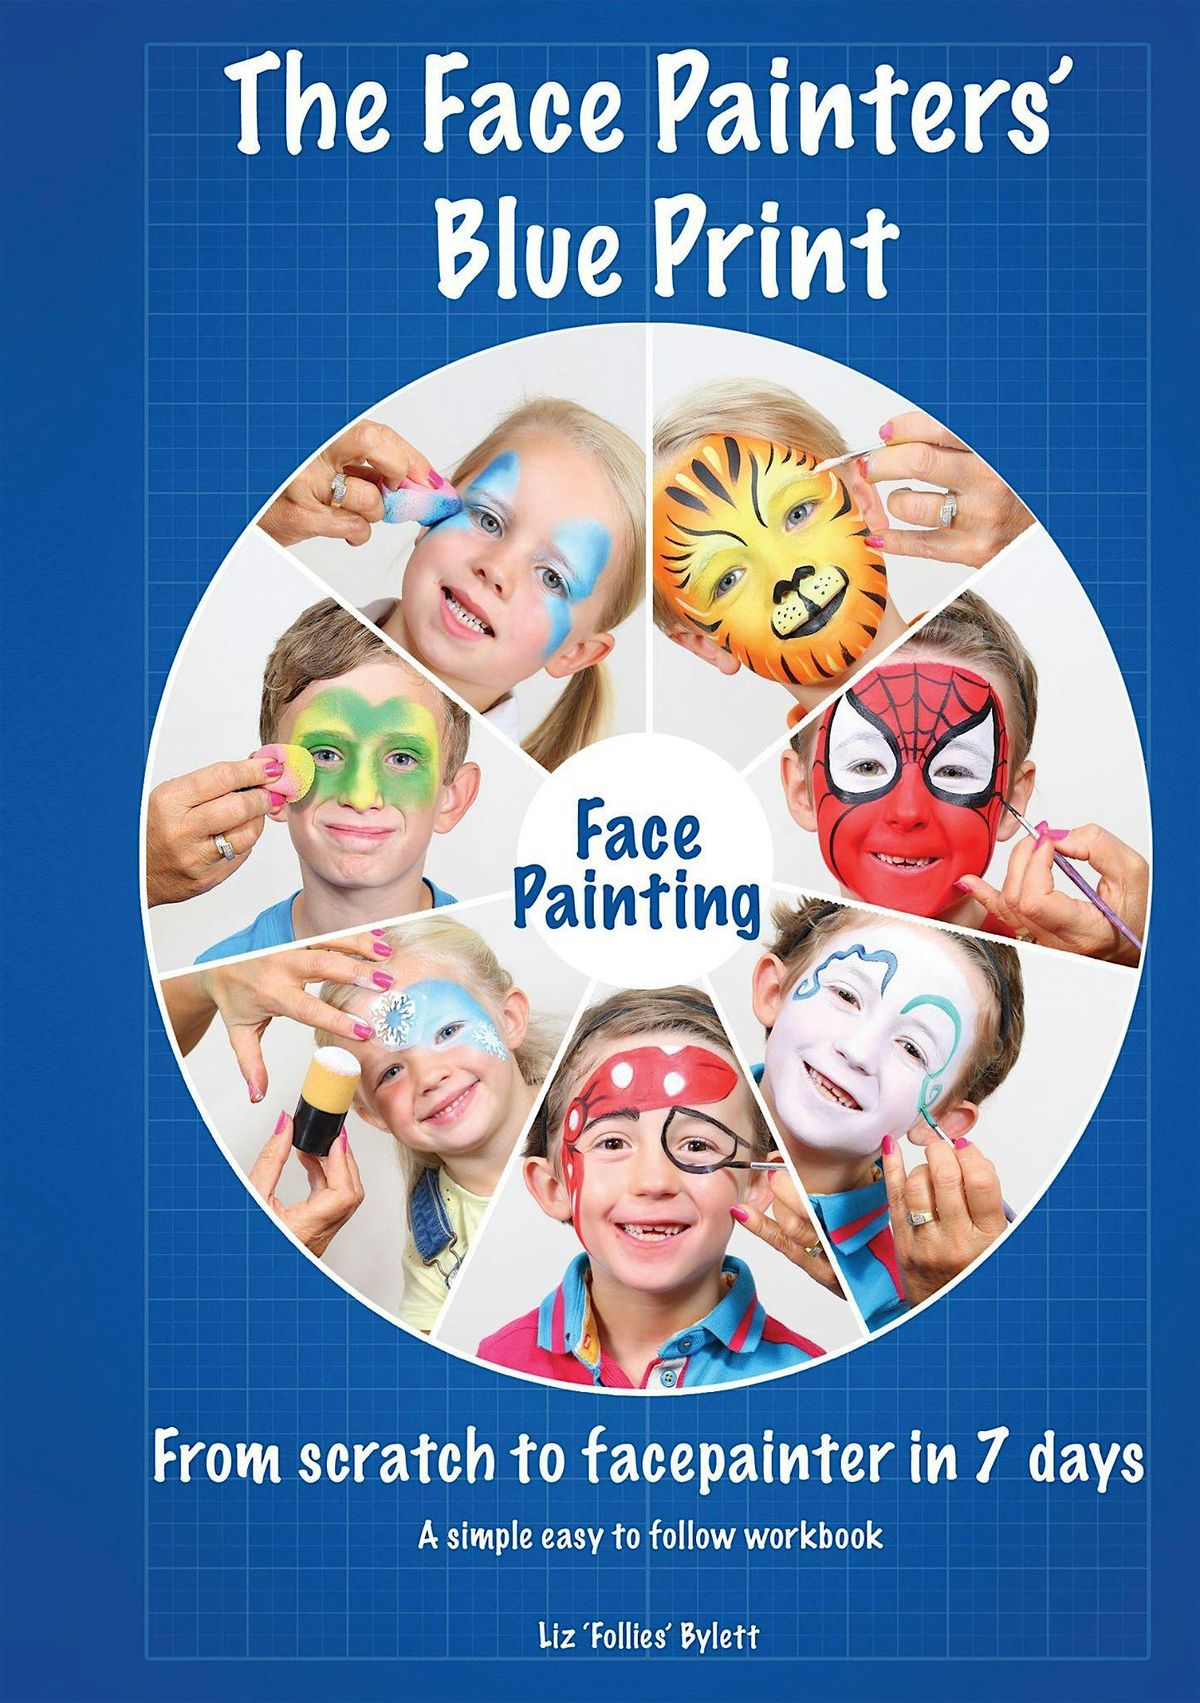 Introduction to Facepainting Class